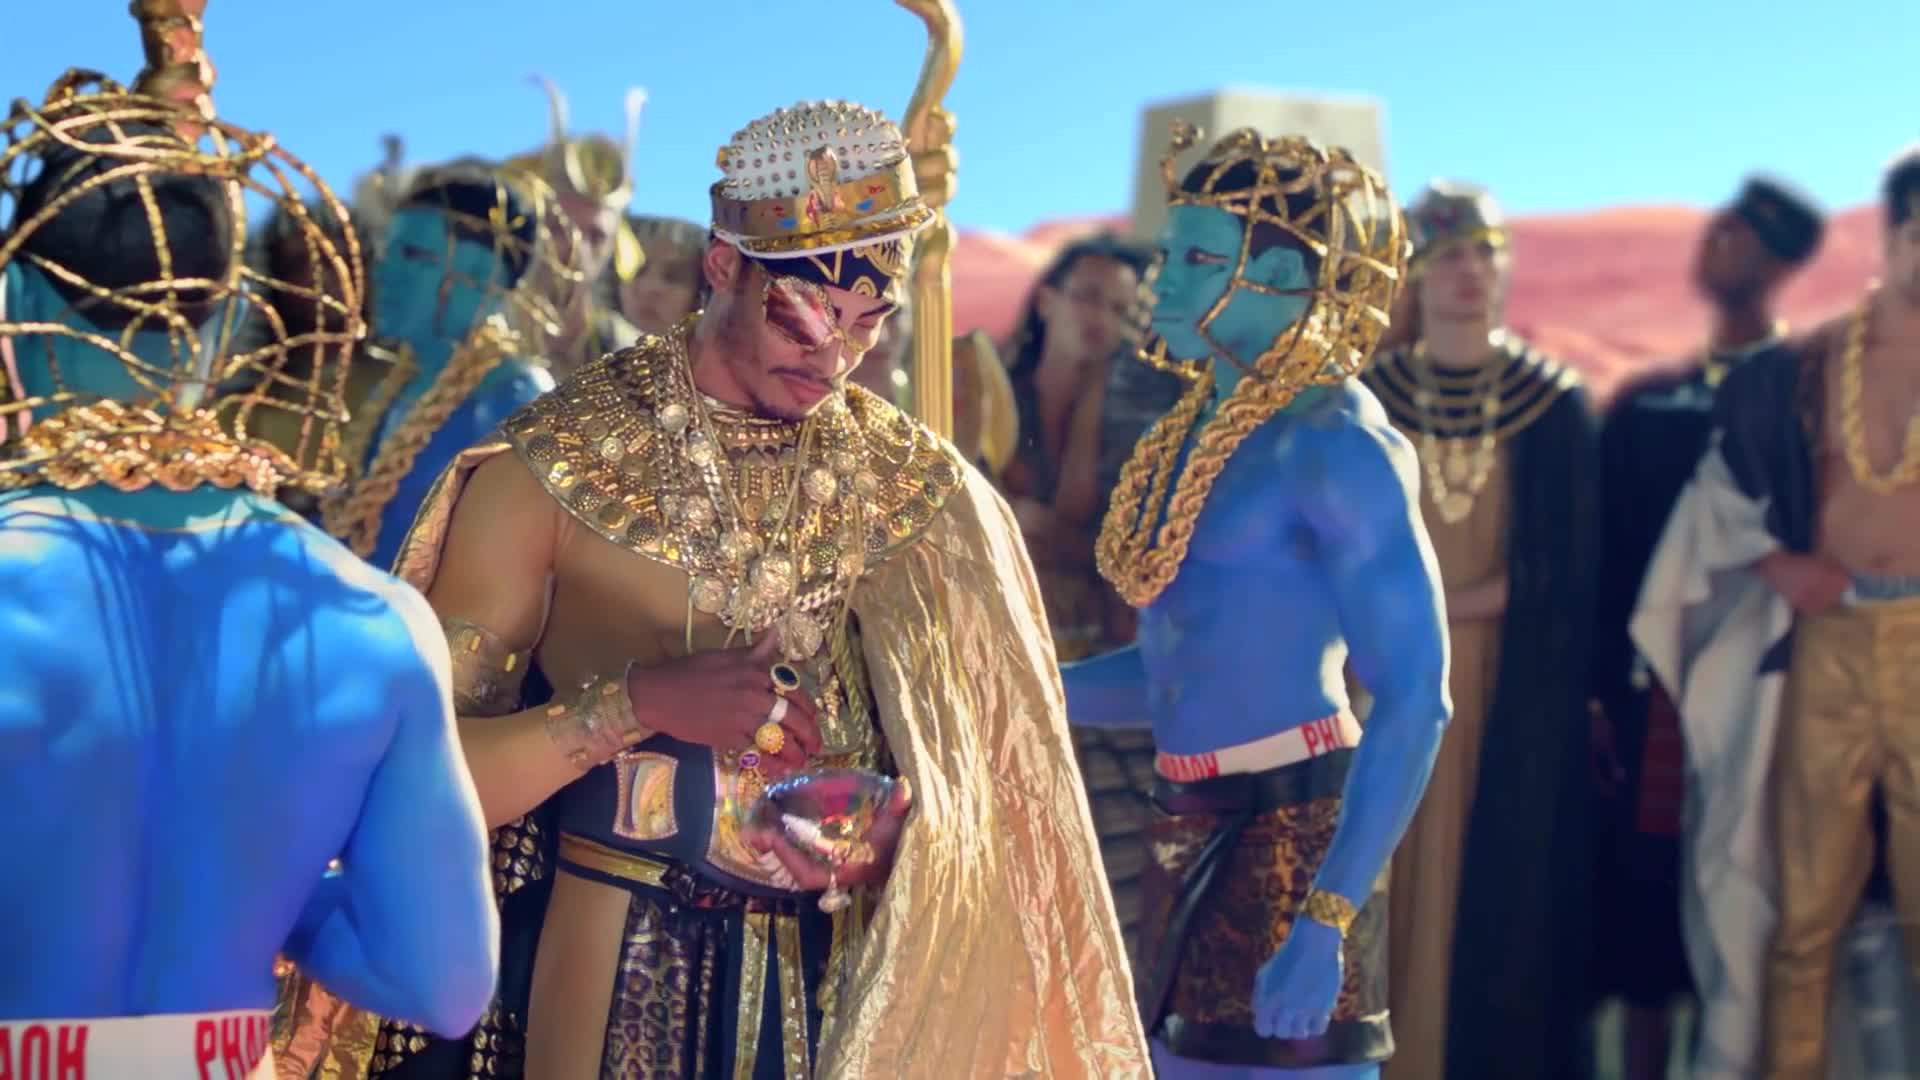 Katy Perrys Dark Horse Video: Preview The Clip & See 